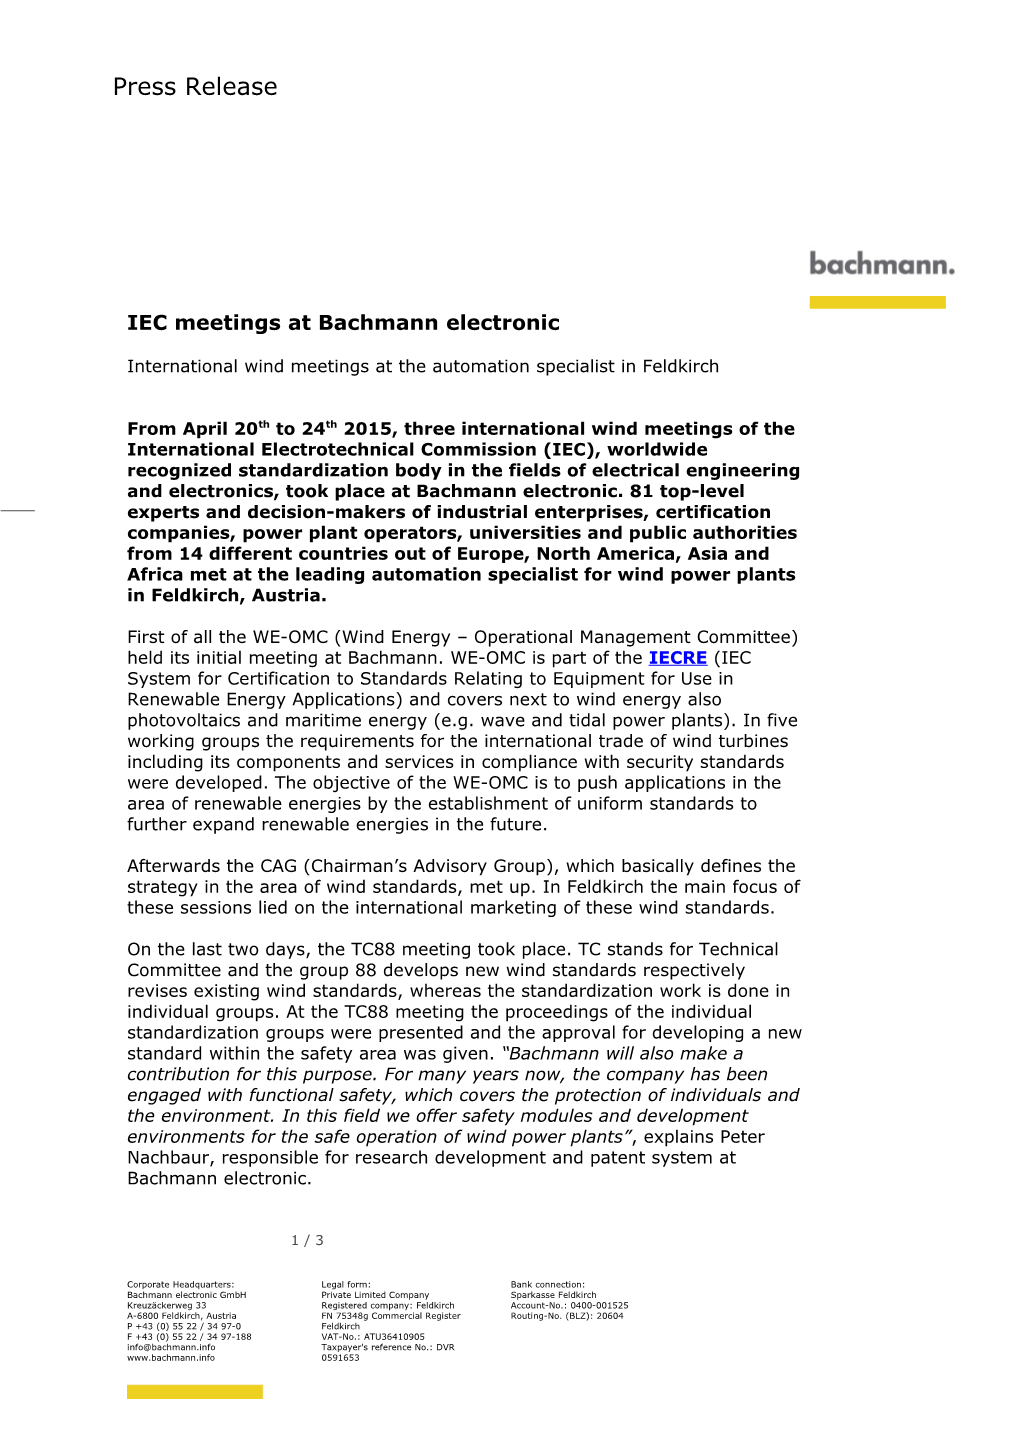 IEC Meetings at Bachmann Electronic